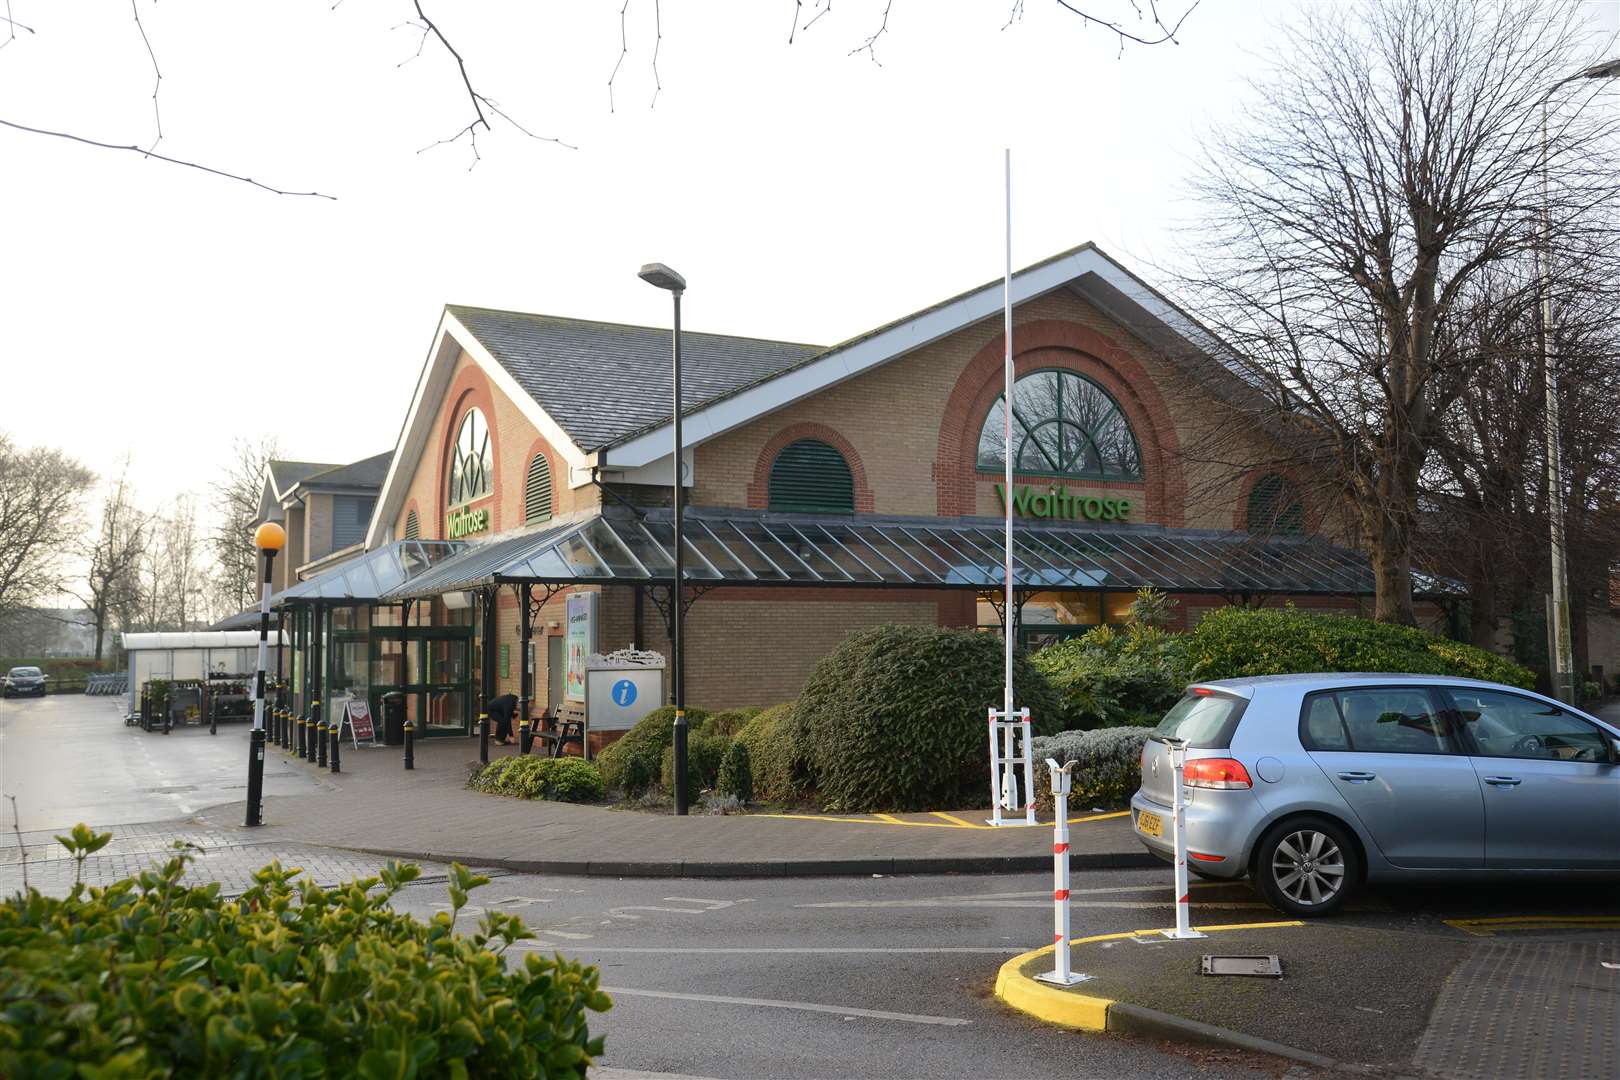 Waitrose will receive a make over. Picture: Gary Browne